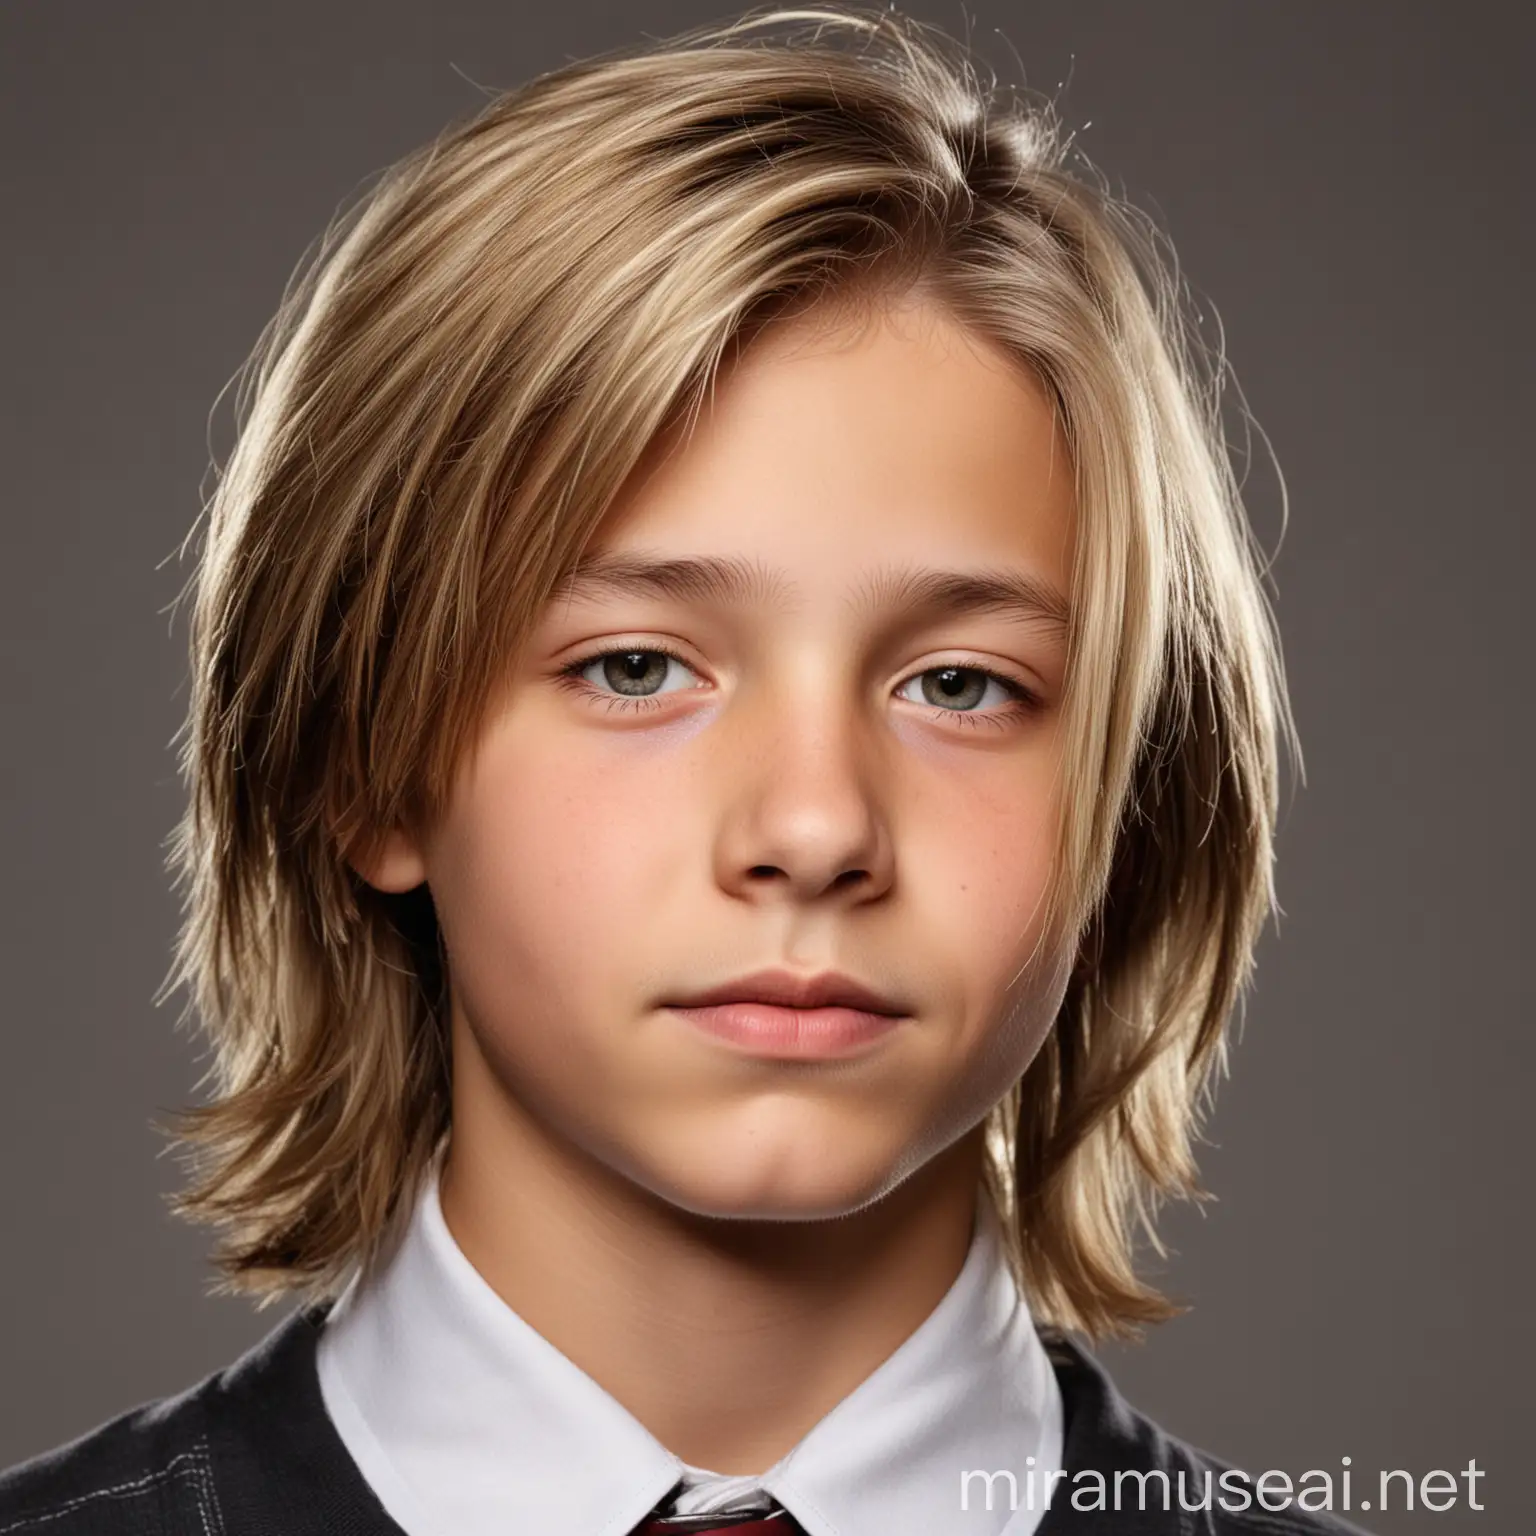 Studio quality portrait photo of thirteen  year old boy,  soft, shiny hair with highlights, collar length hair parted on the side, head shot, close up, extreme detail, left side of head facing camera